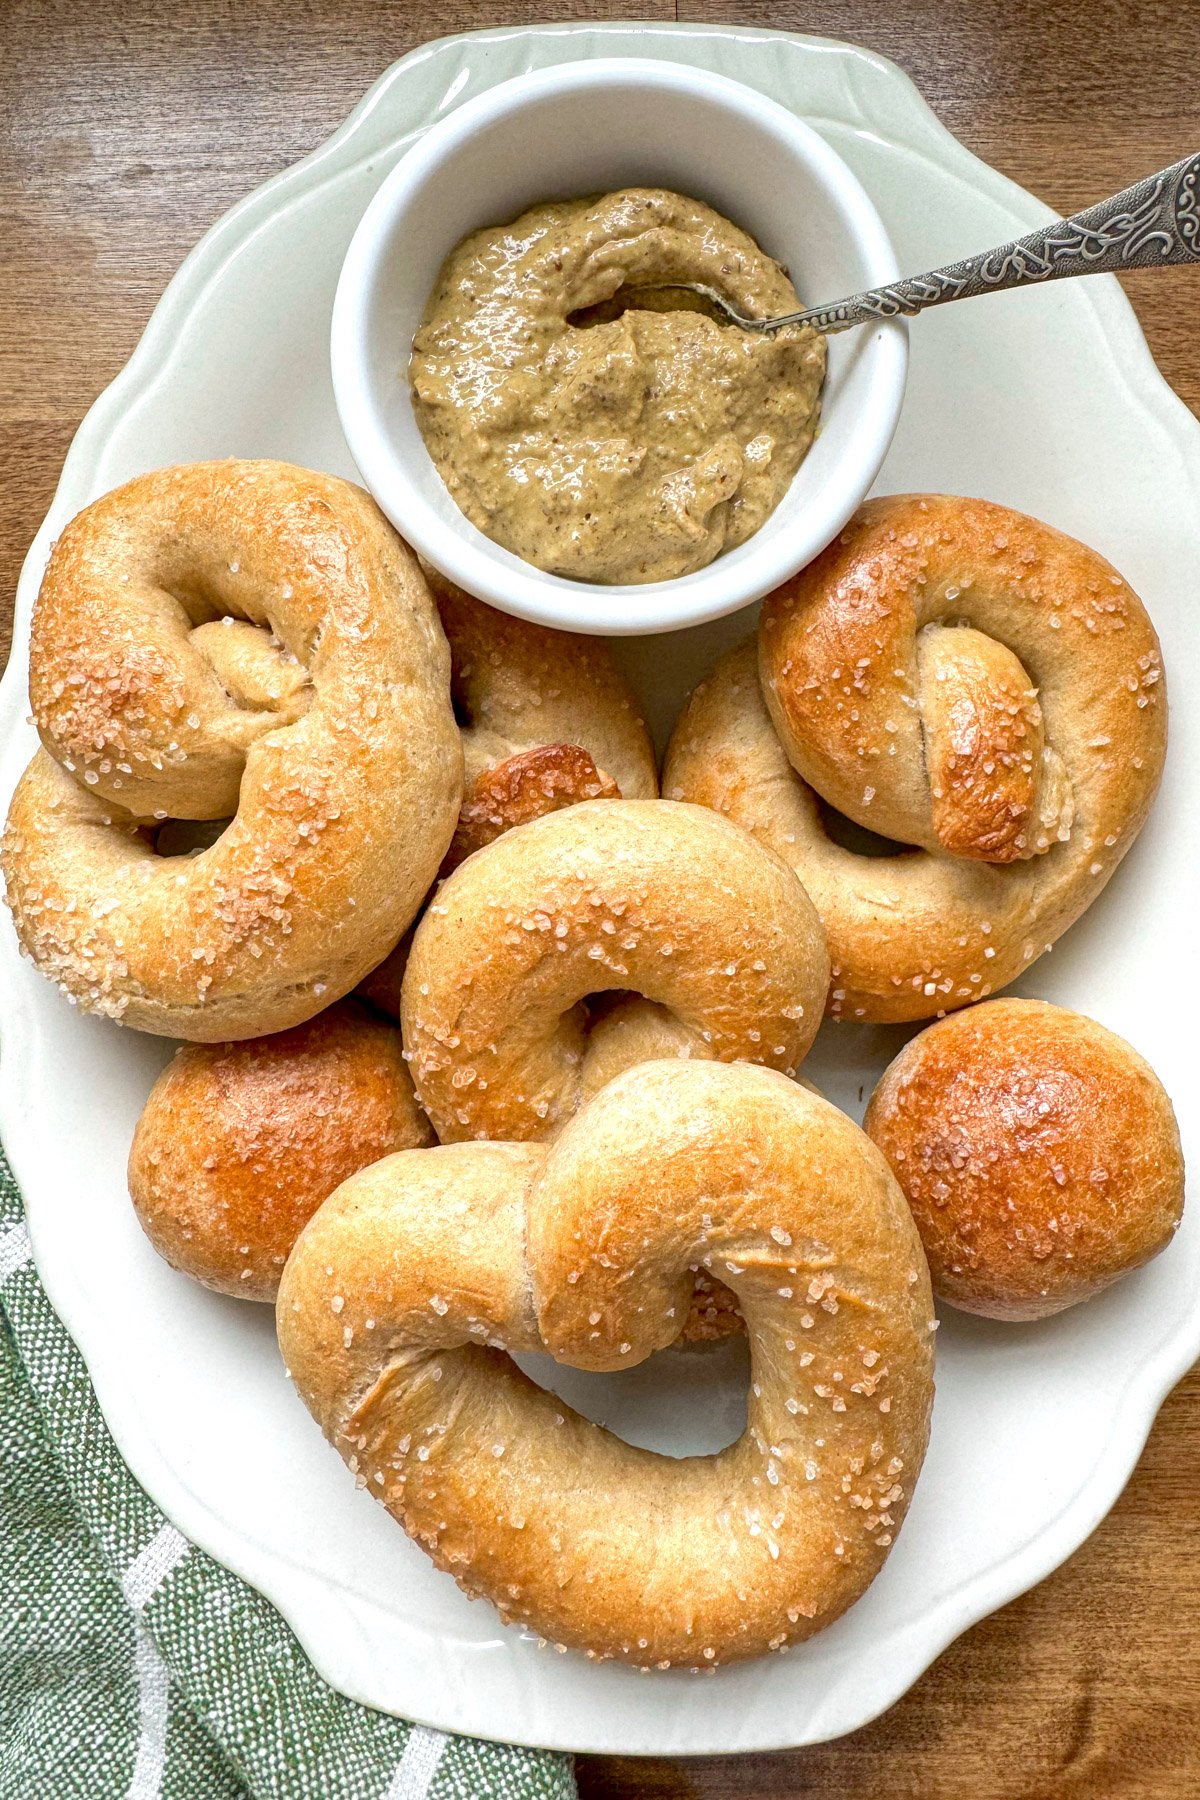 shaped, baked pretzels on a white platter with mustard